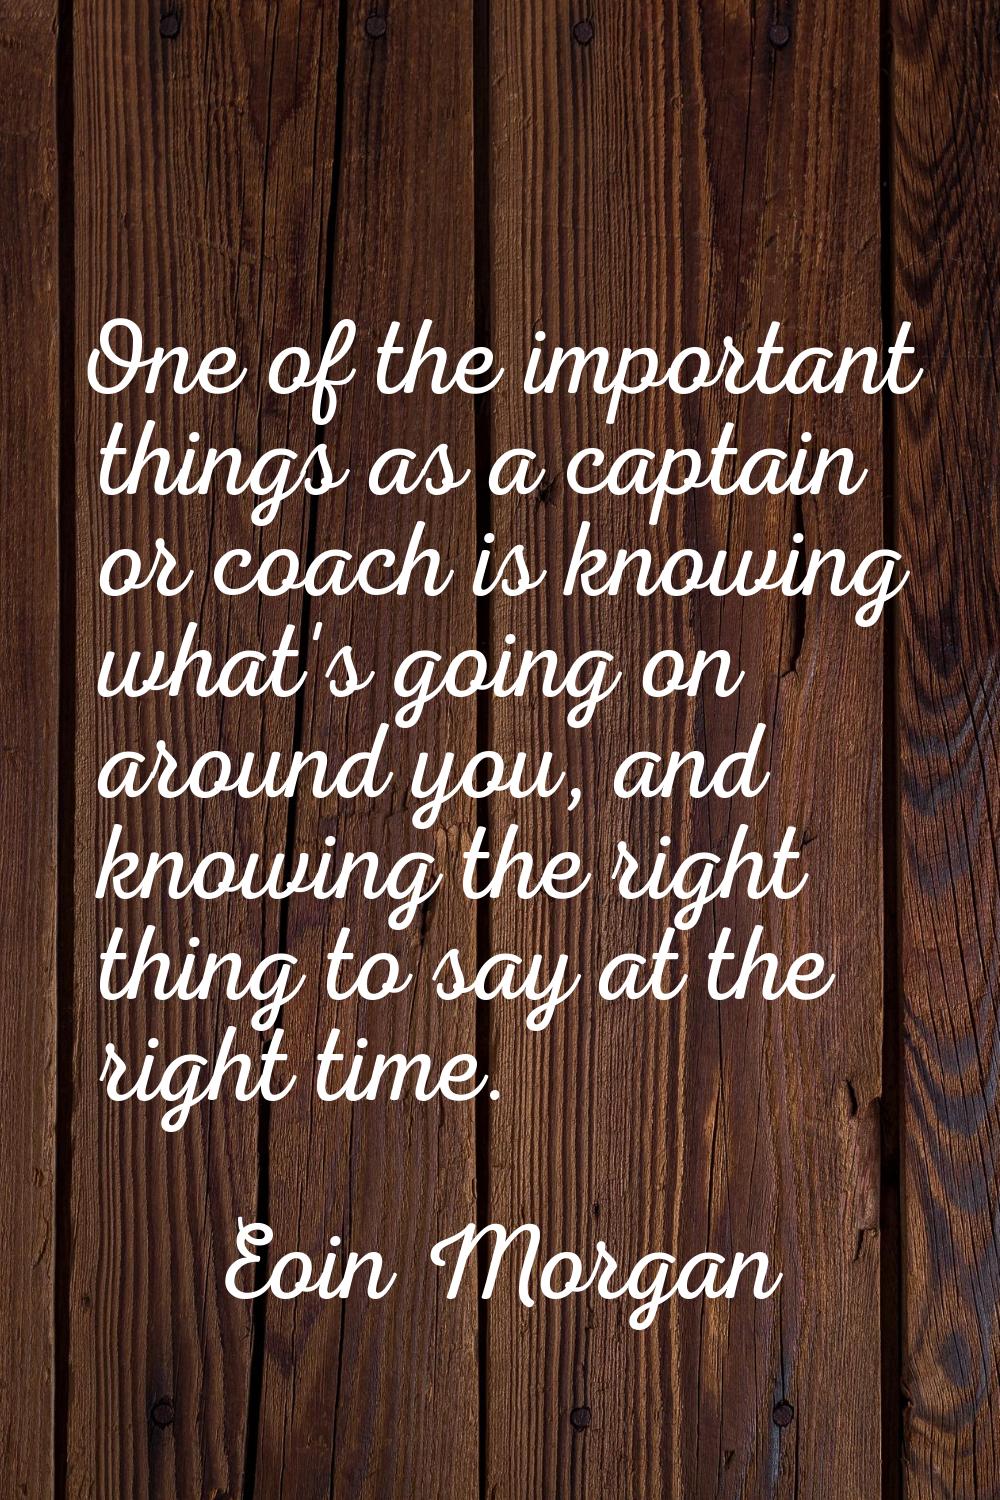 One of the important things as a captain or coach is knowing what's going on around you, and knowin